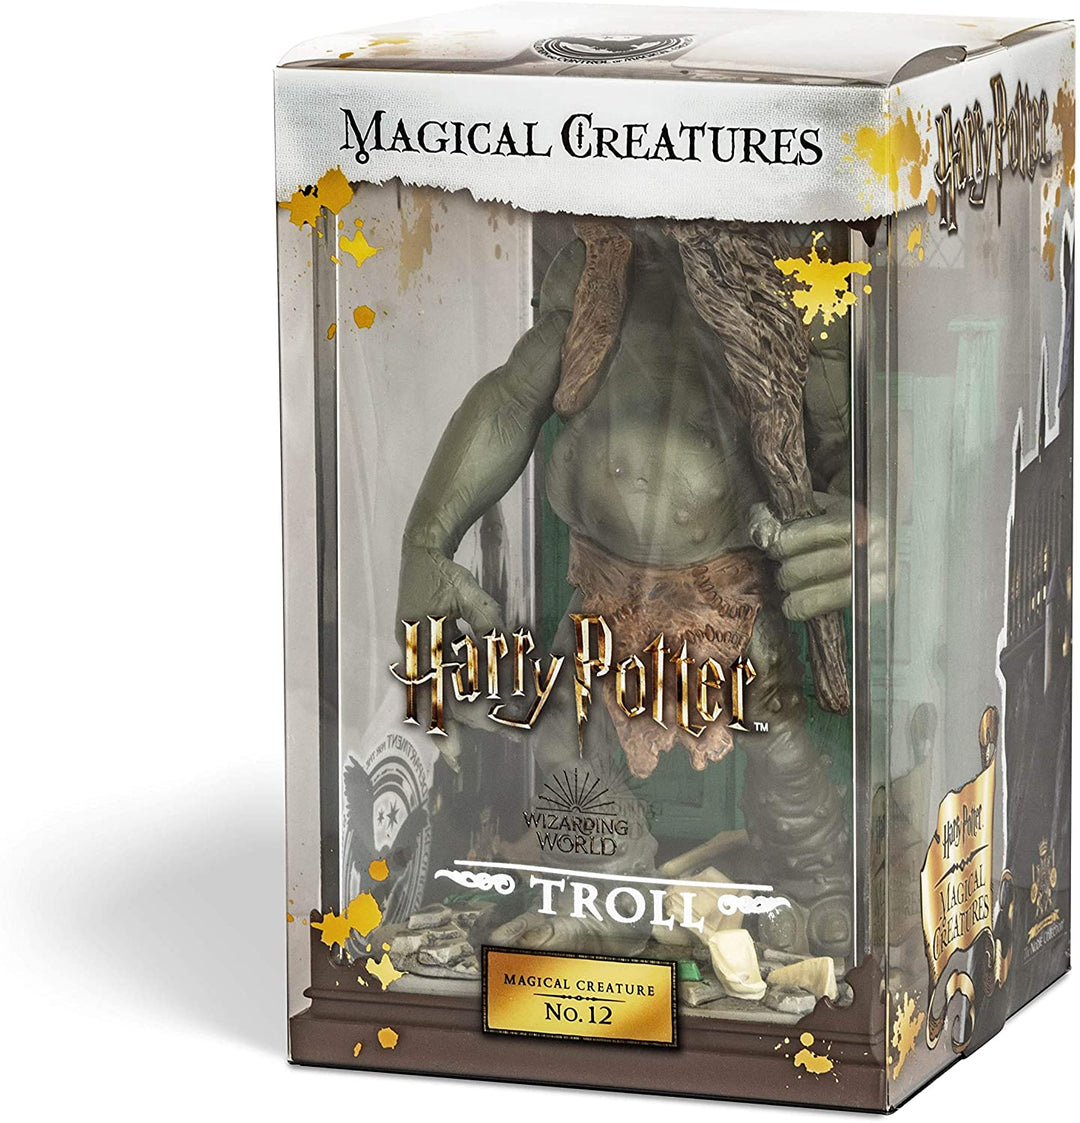 The Noble Collection - Magical Creatures Troll - Hand-Painted Magical Creature #12 - Officially Licensed 7in (18.5cm) Harry Potter Toys Collectable Figures - For Kids & Adults